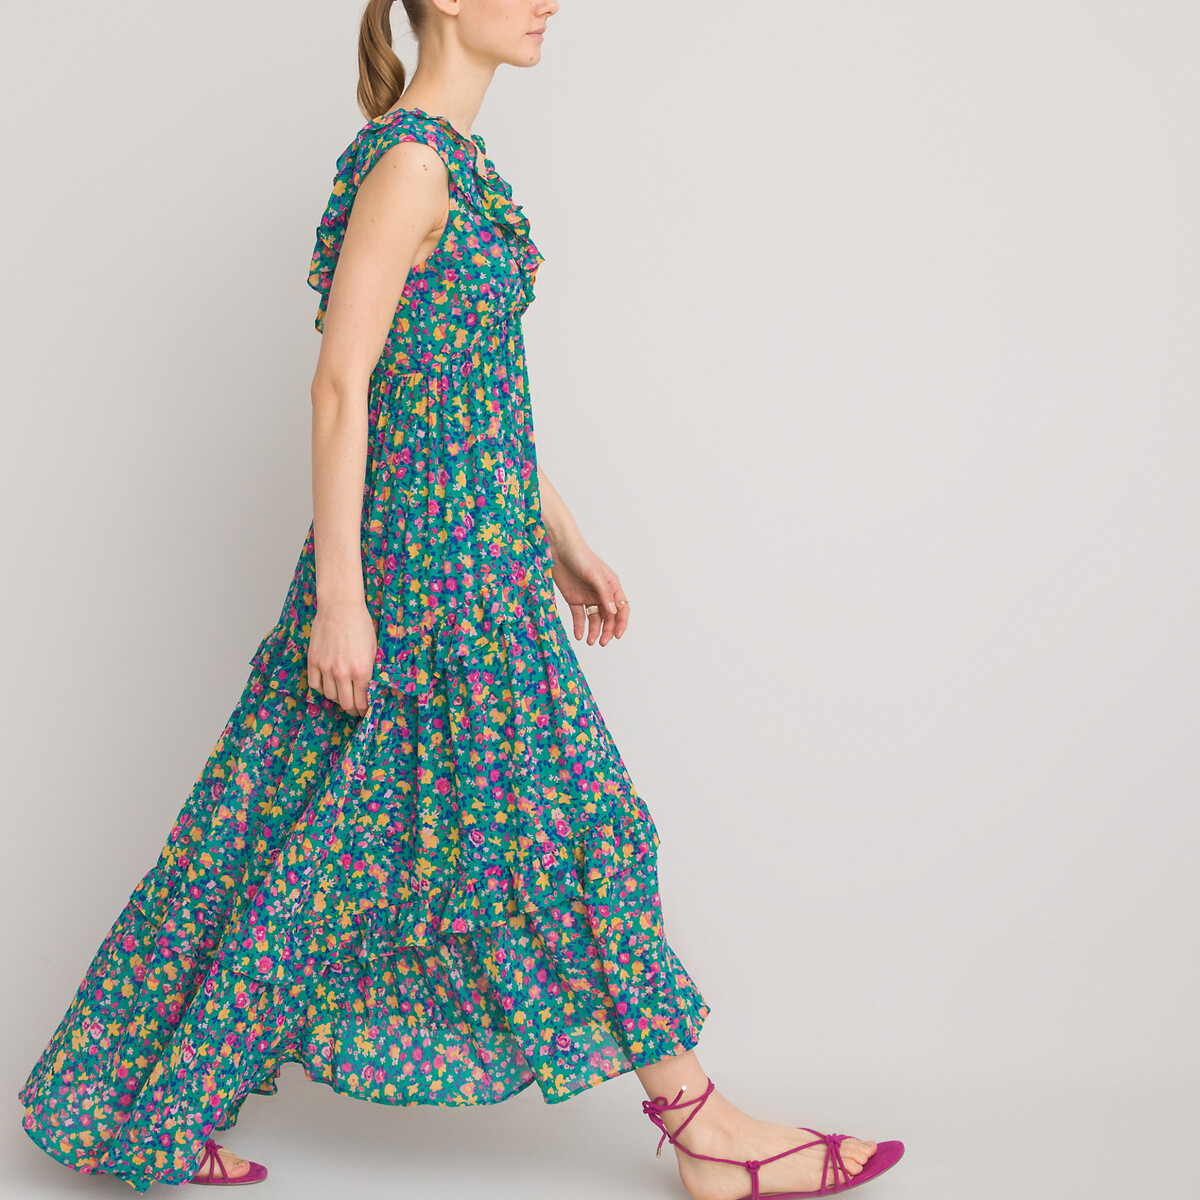 Recycled ruffled midi dress in floral ...